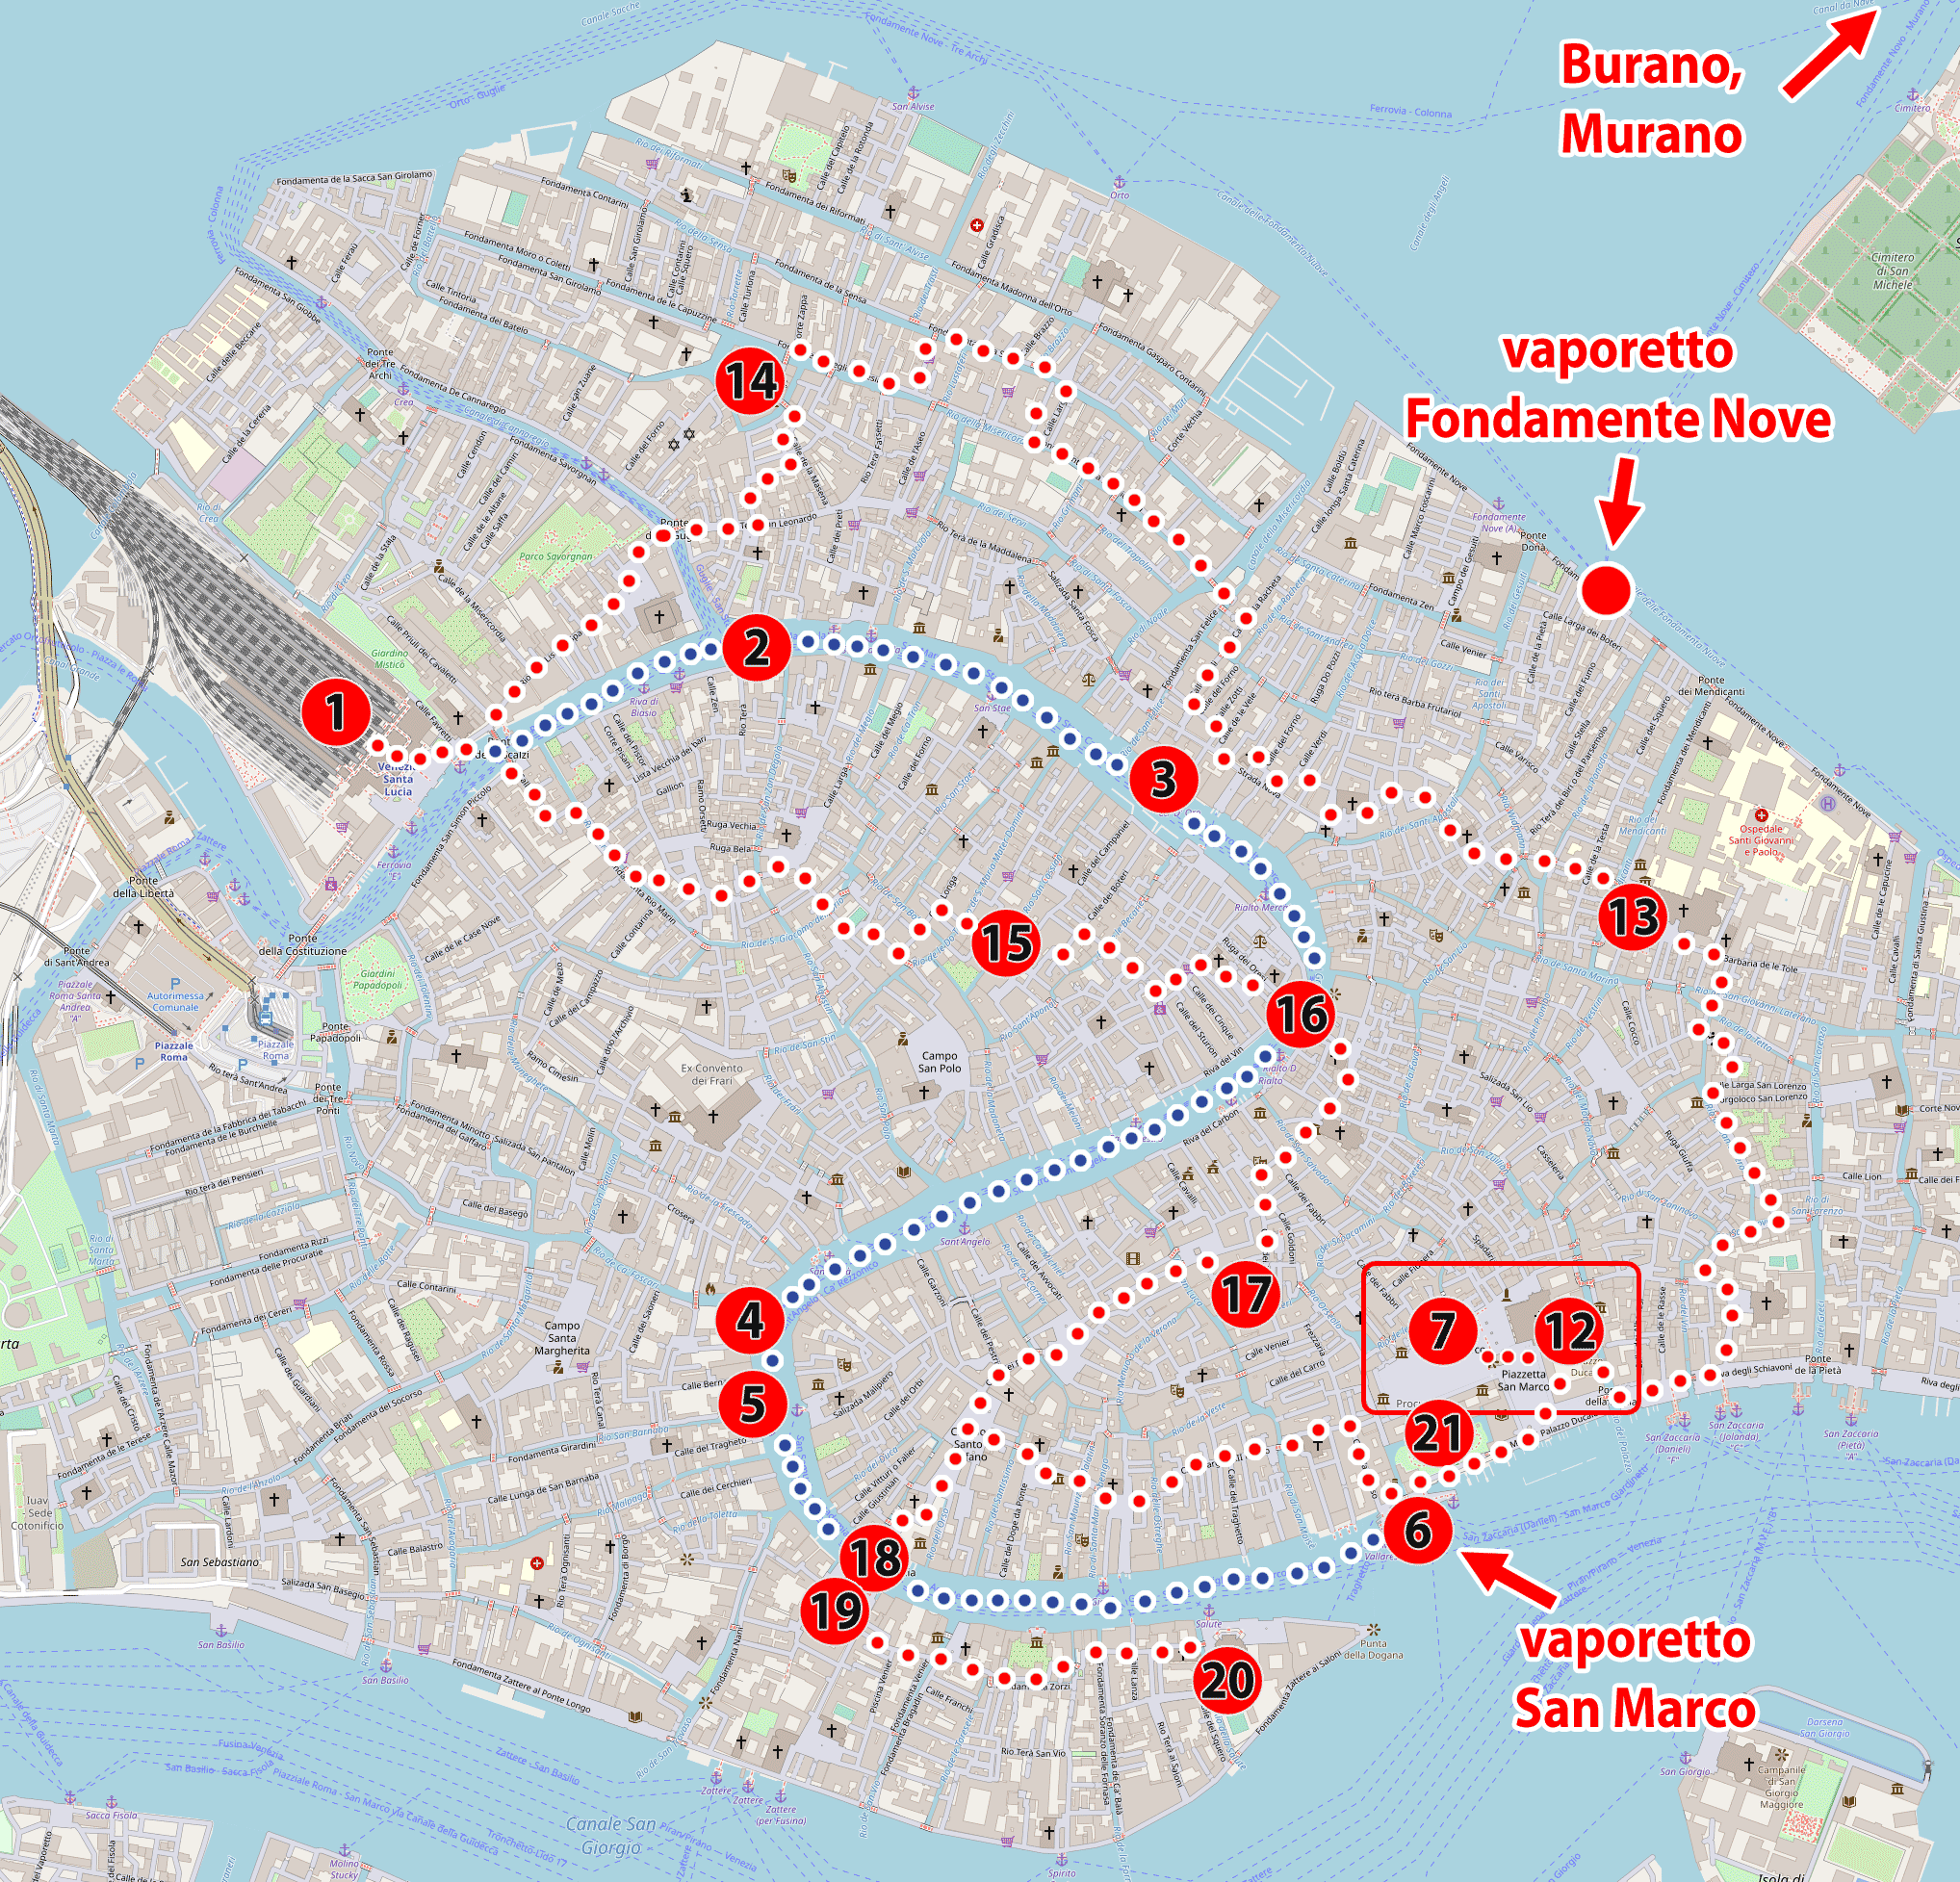 Venice - tourist map PDF - tourist attractions, What to see? Guide.